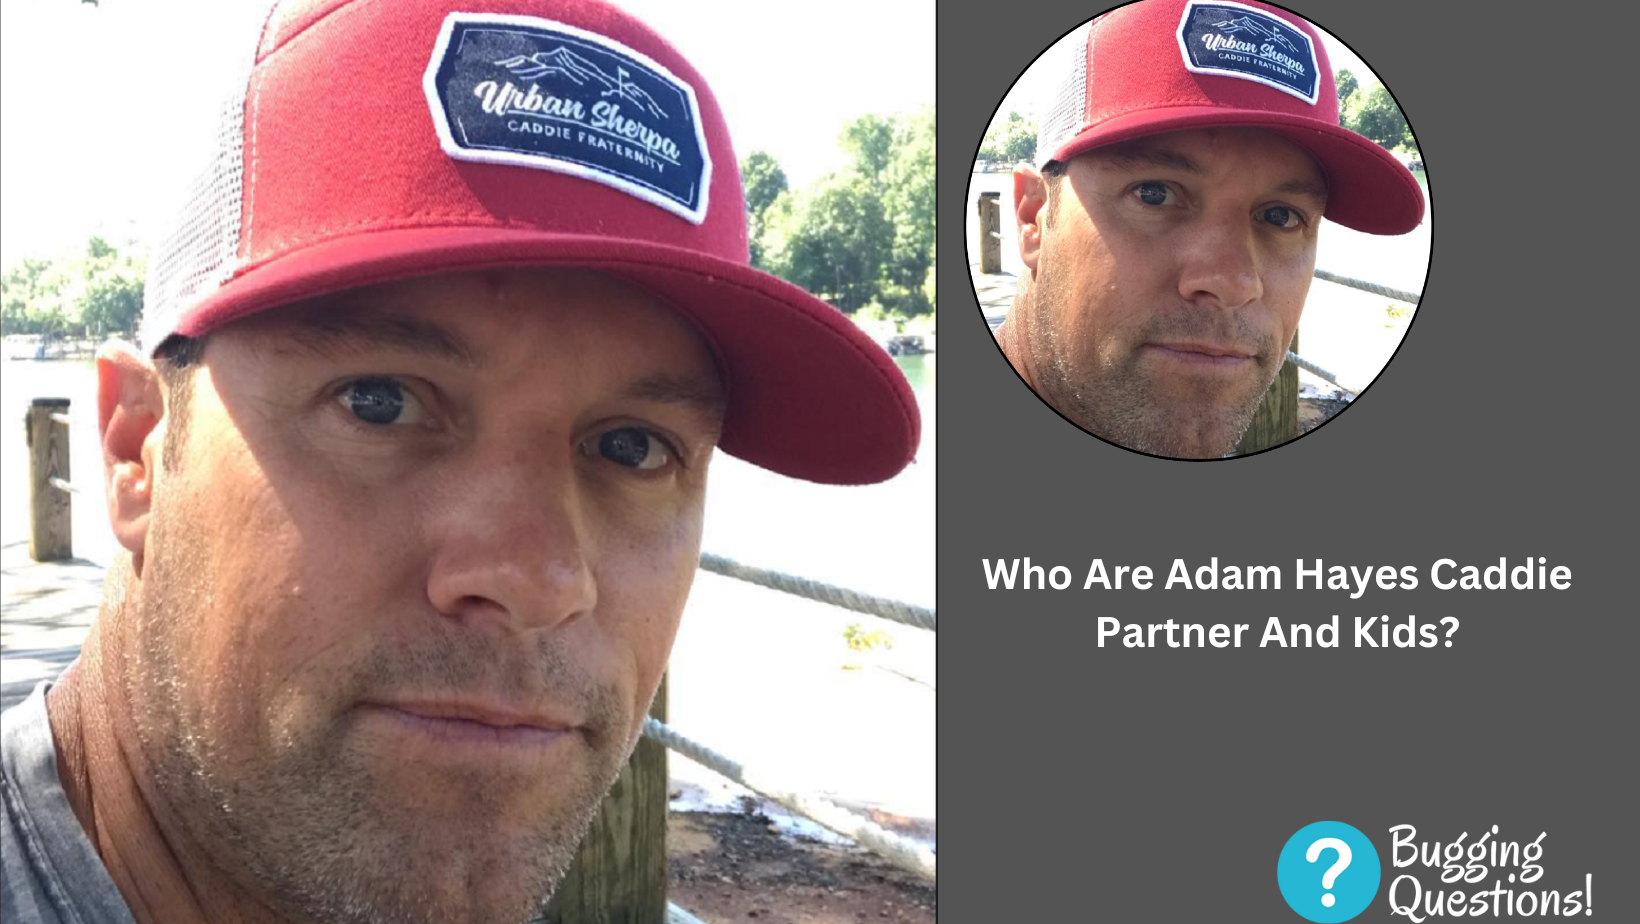 Who Are Adam Hayes Caddie Partner And Kids?